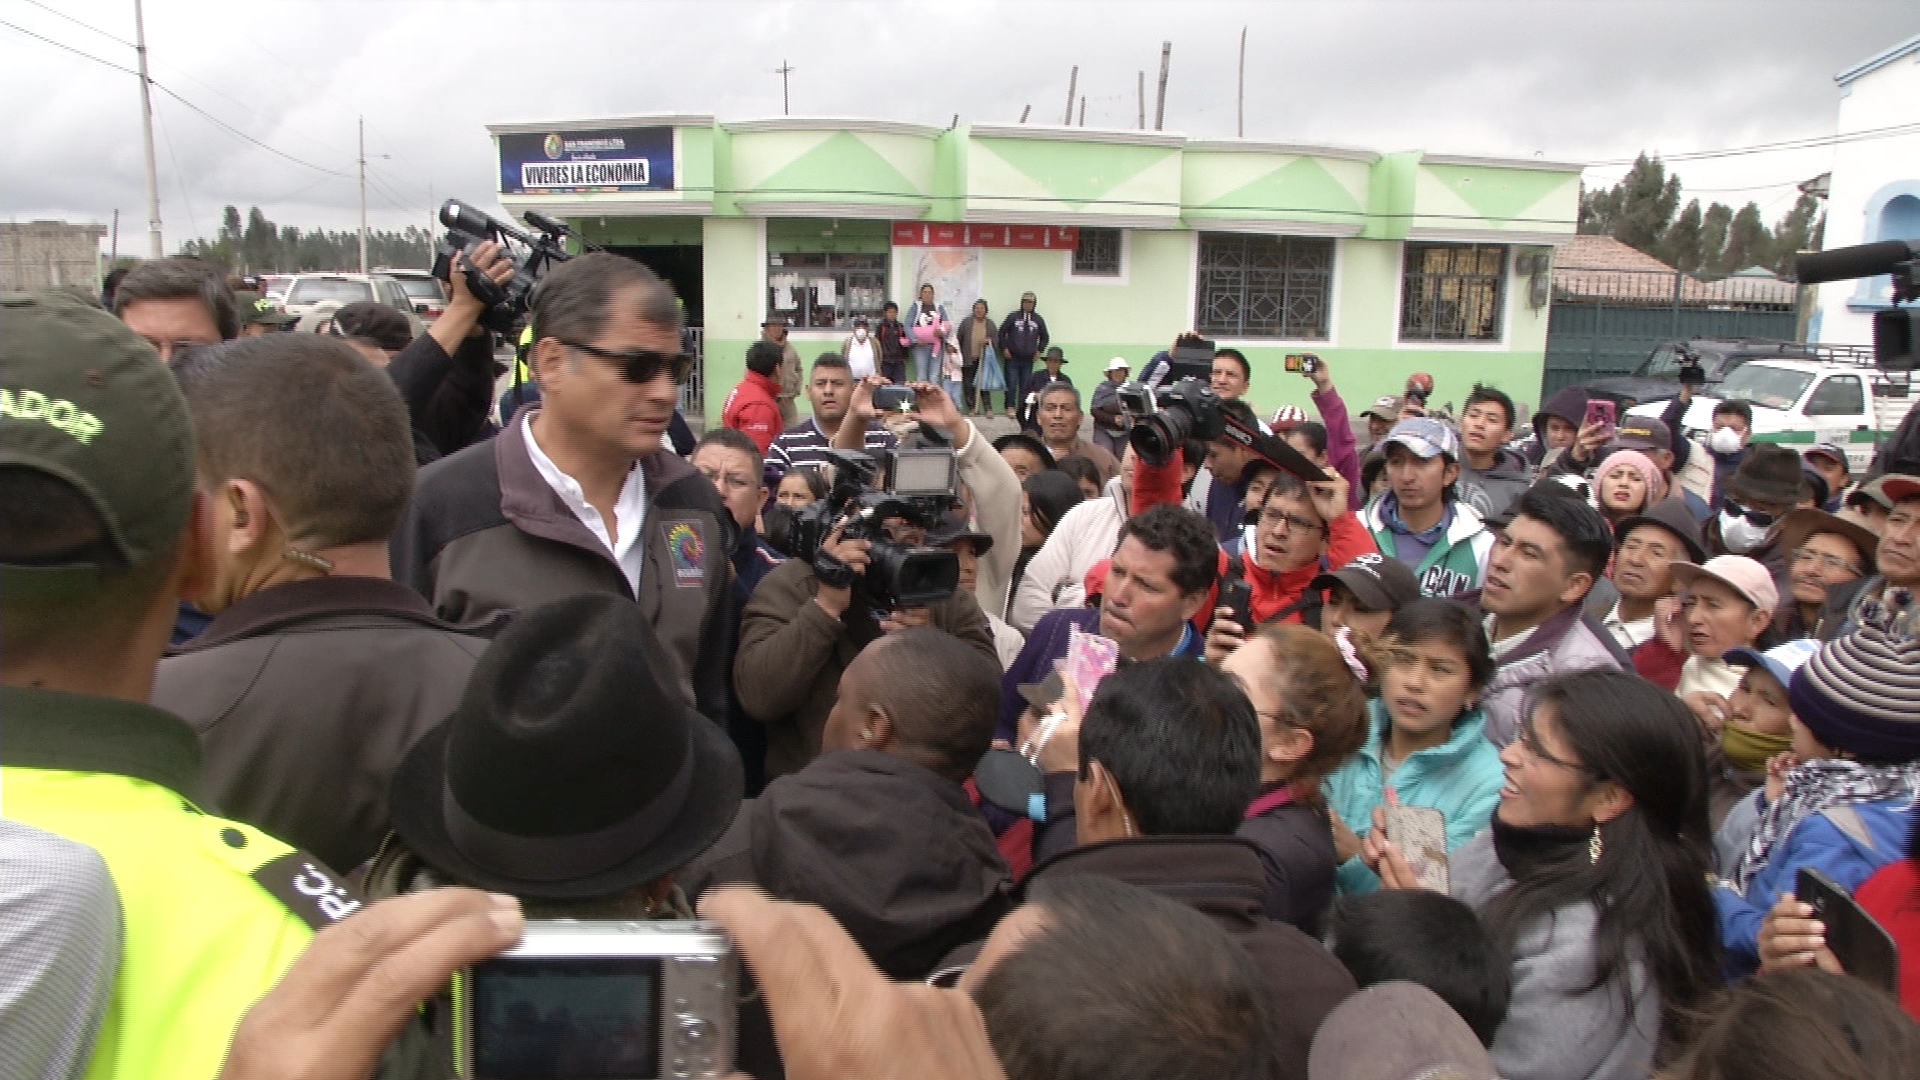 President Correa met with community members to discuss what to do in the event of an emergency.